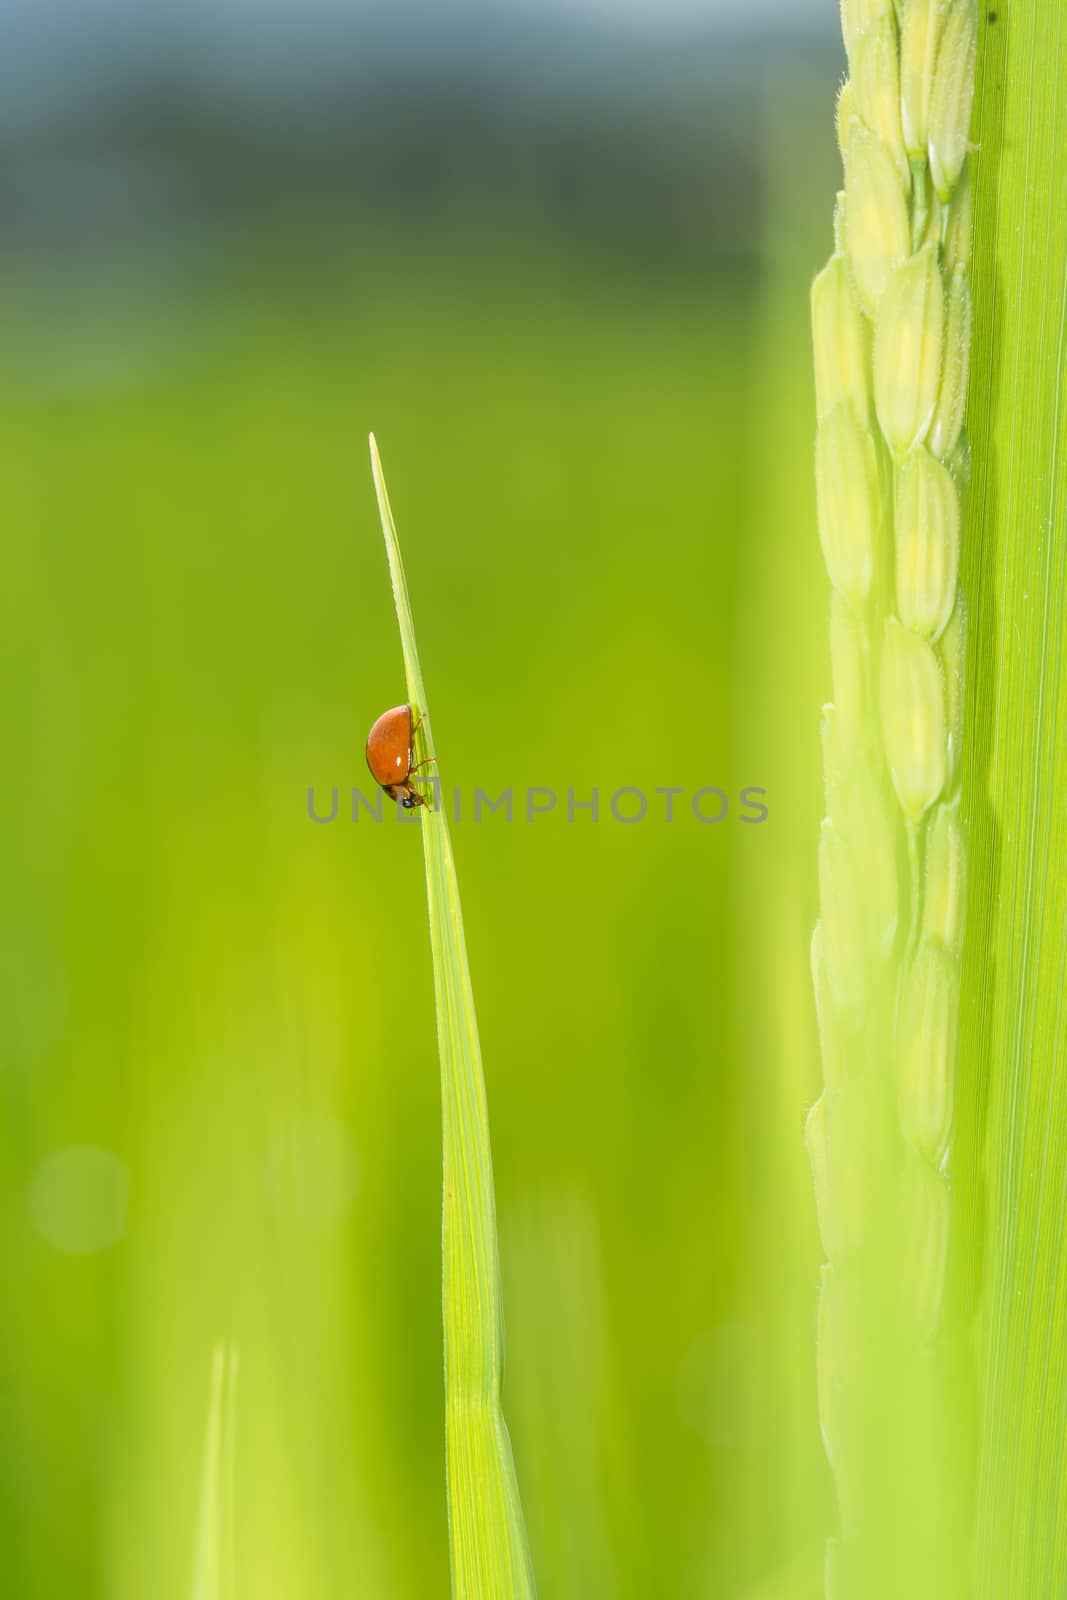 the red ladybug on green rice leaf under the morning sunlight